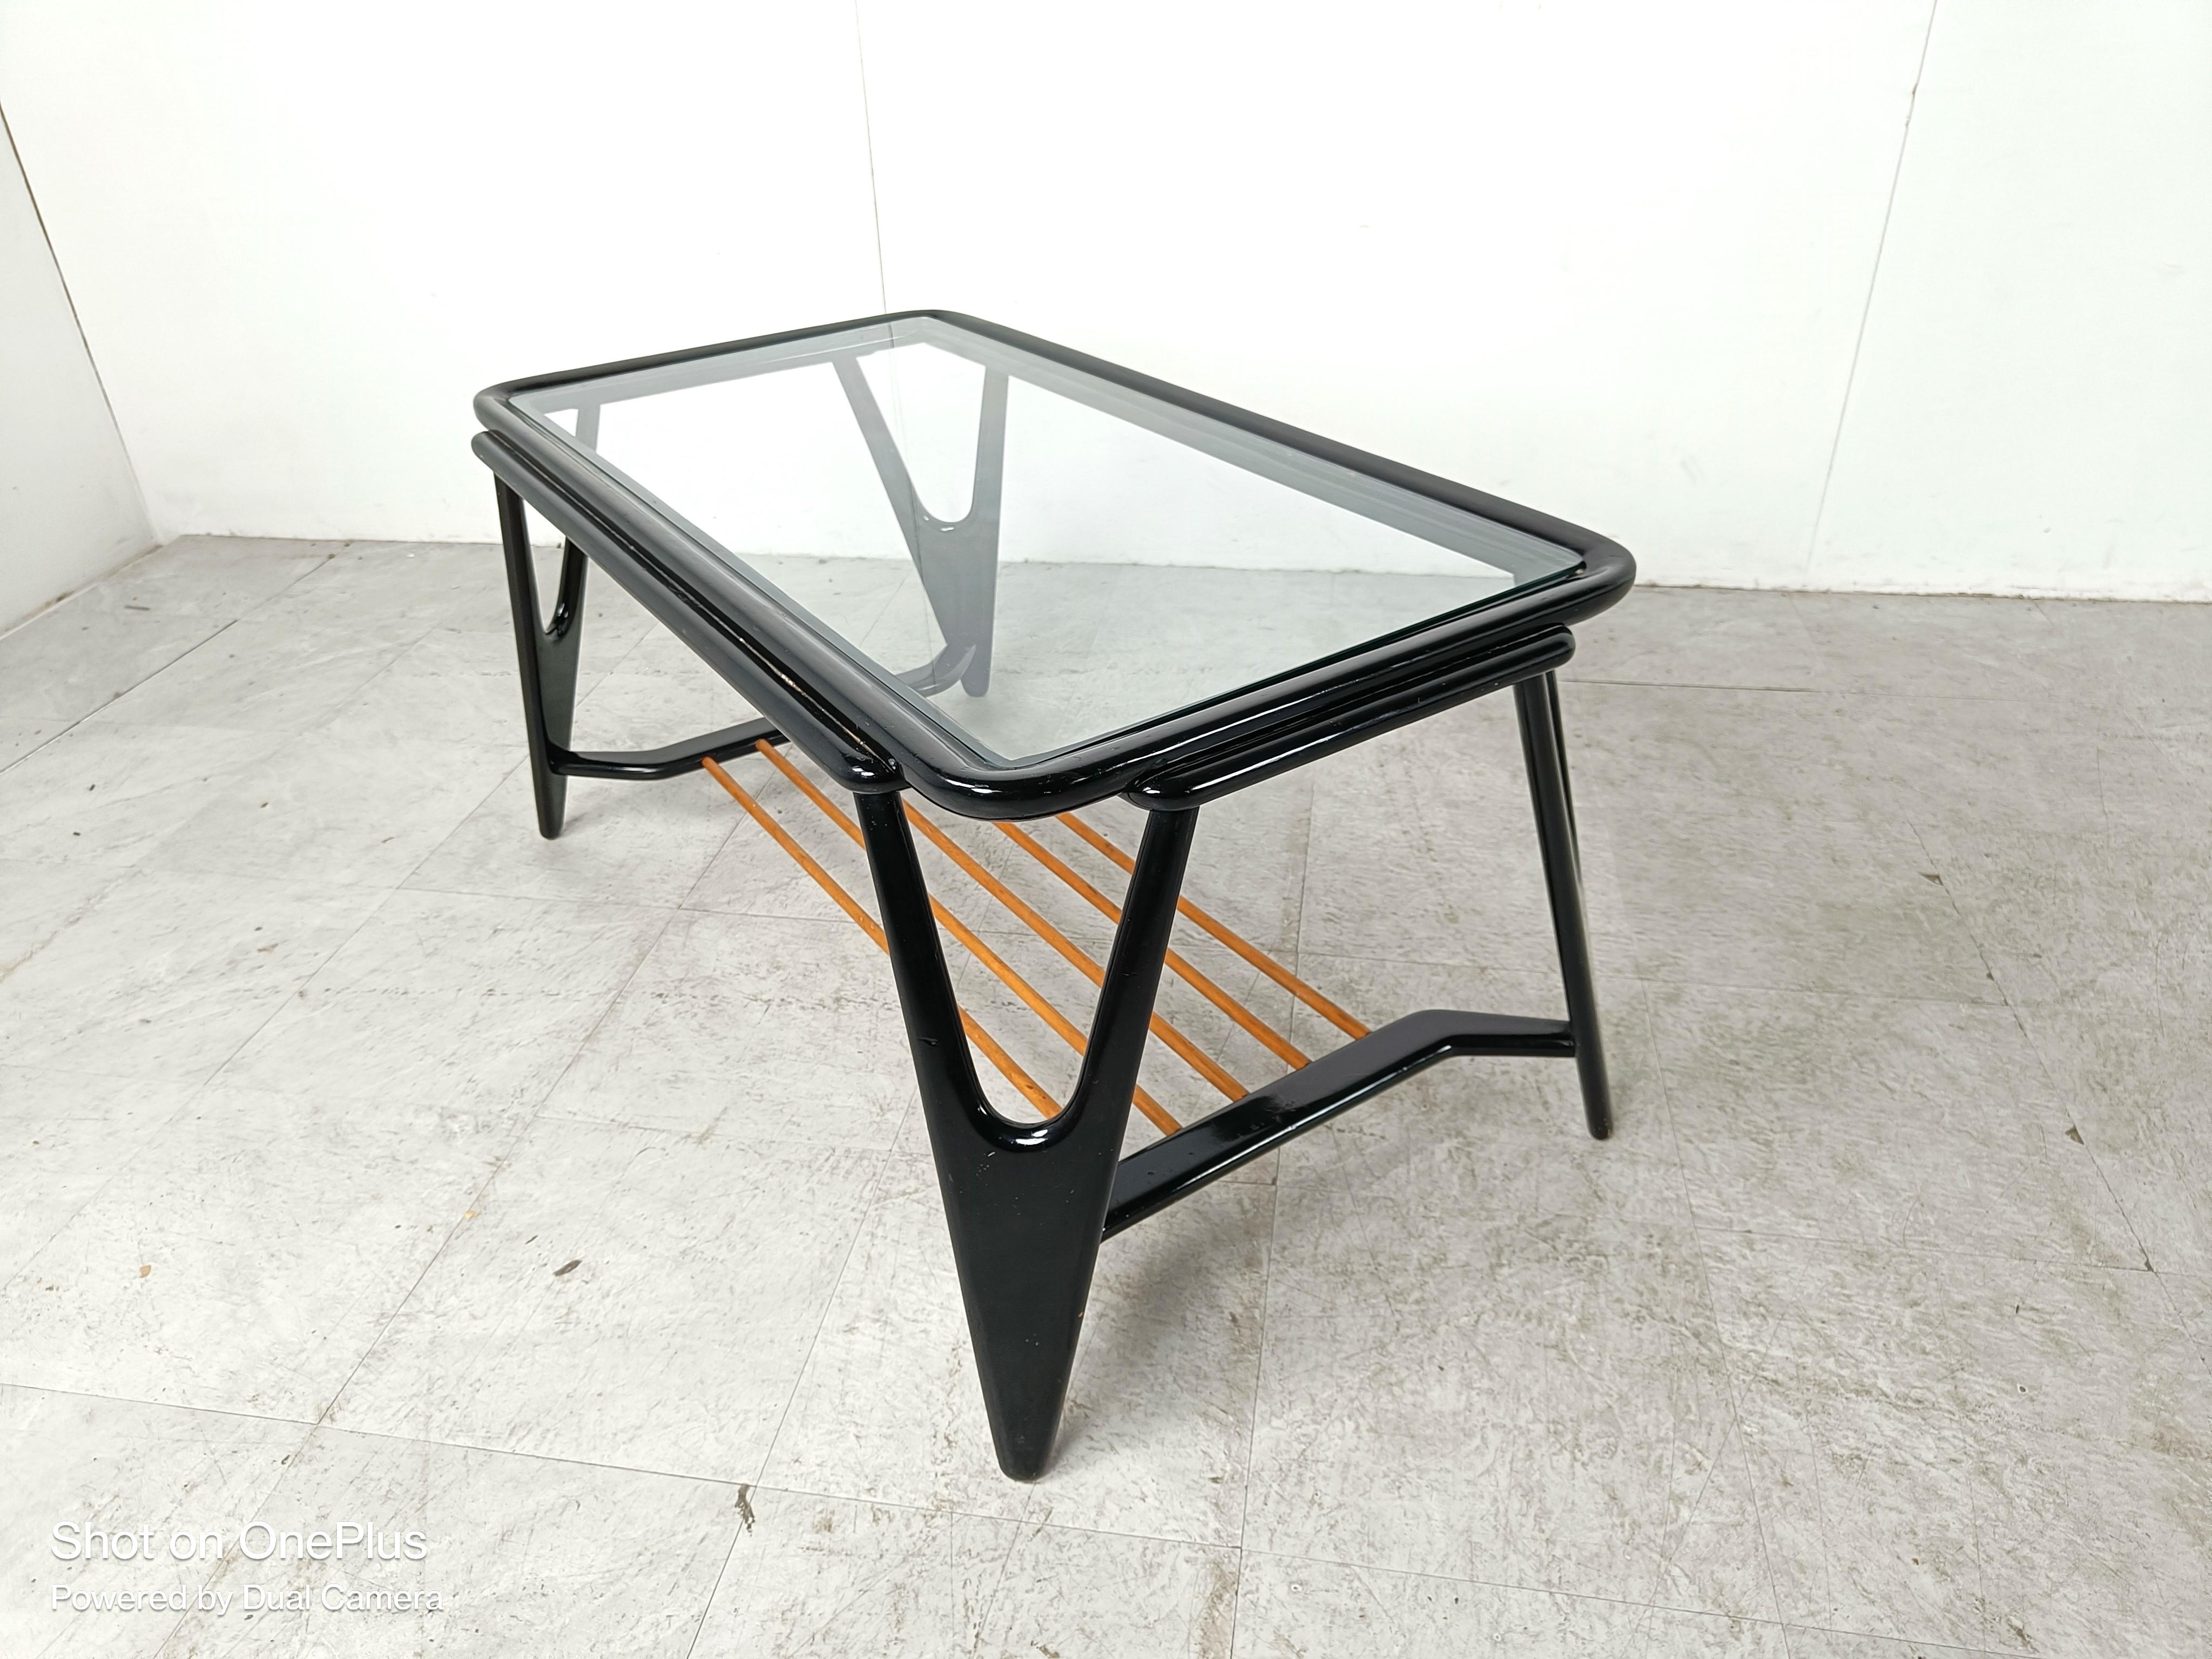 Elegant mid century coffee table by De Ster Gelderland.

The coffee table has a beautifully crafted lacquered wooden base, with a glass top and a clear wooden tube lower shel.

In the manner of Cesare Lacca, Alfred Hendrickx,..

1950s - The